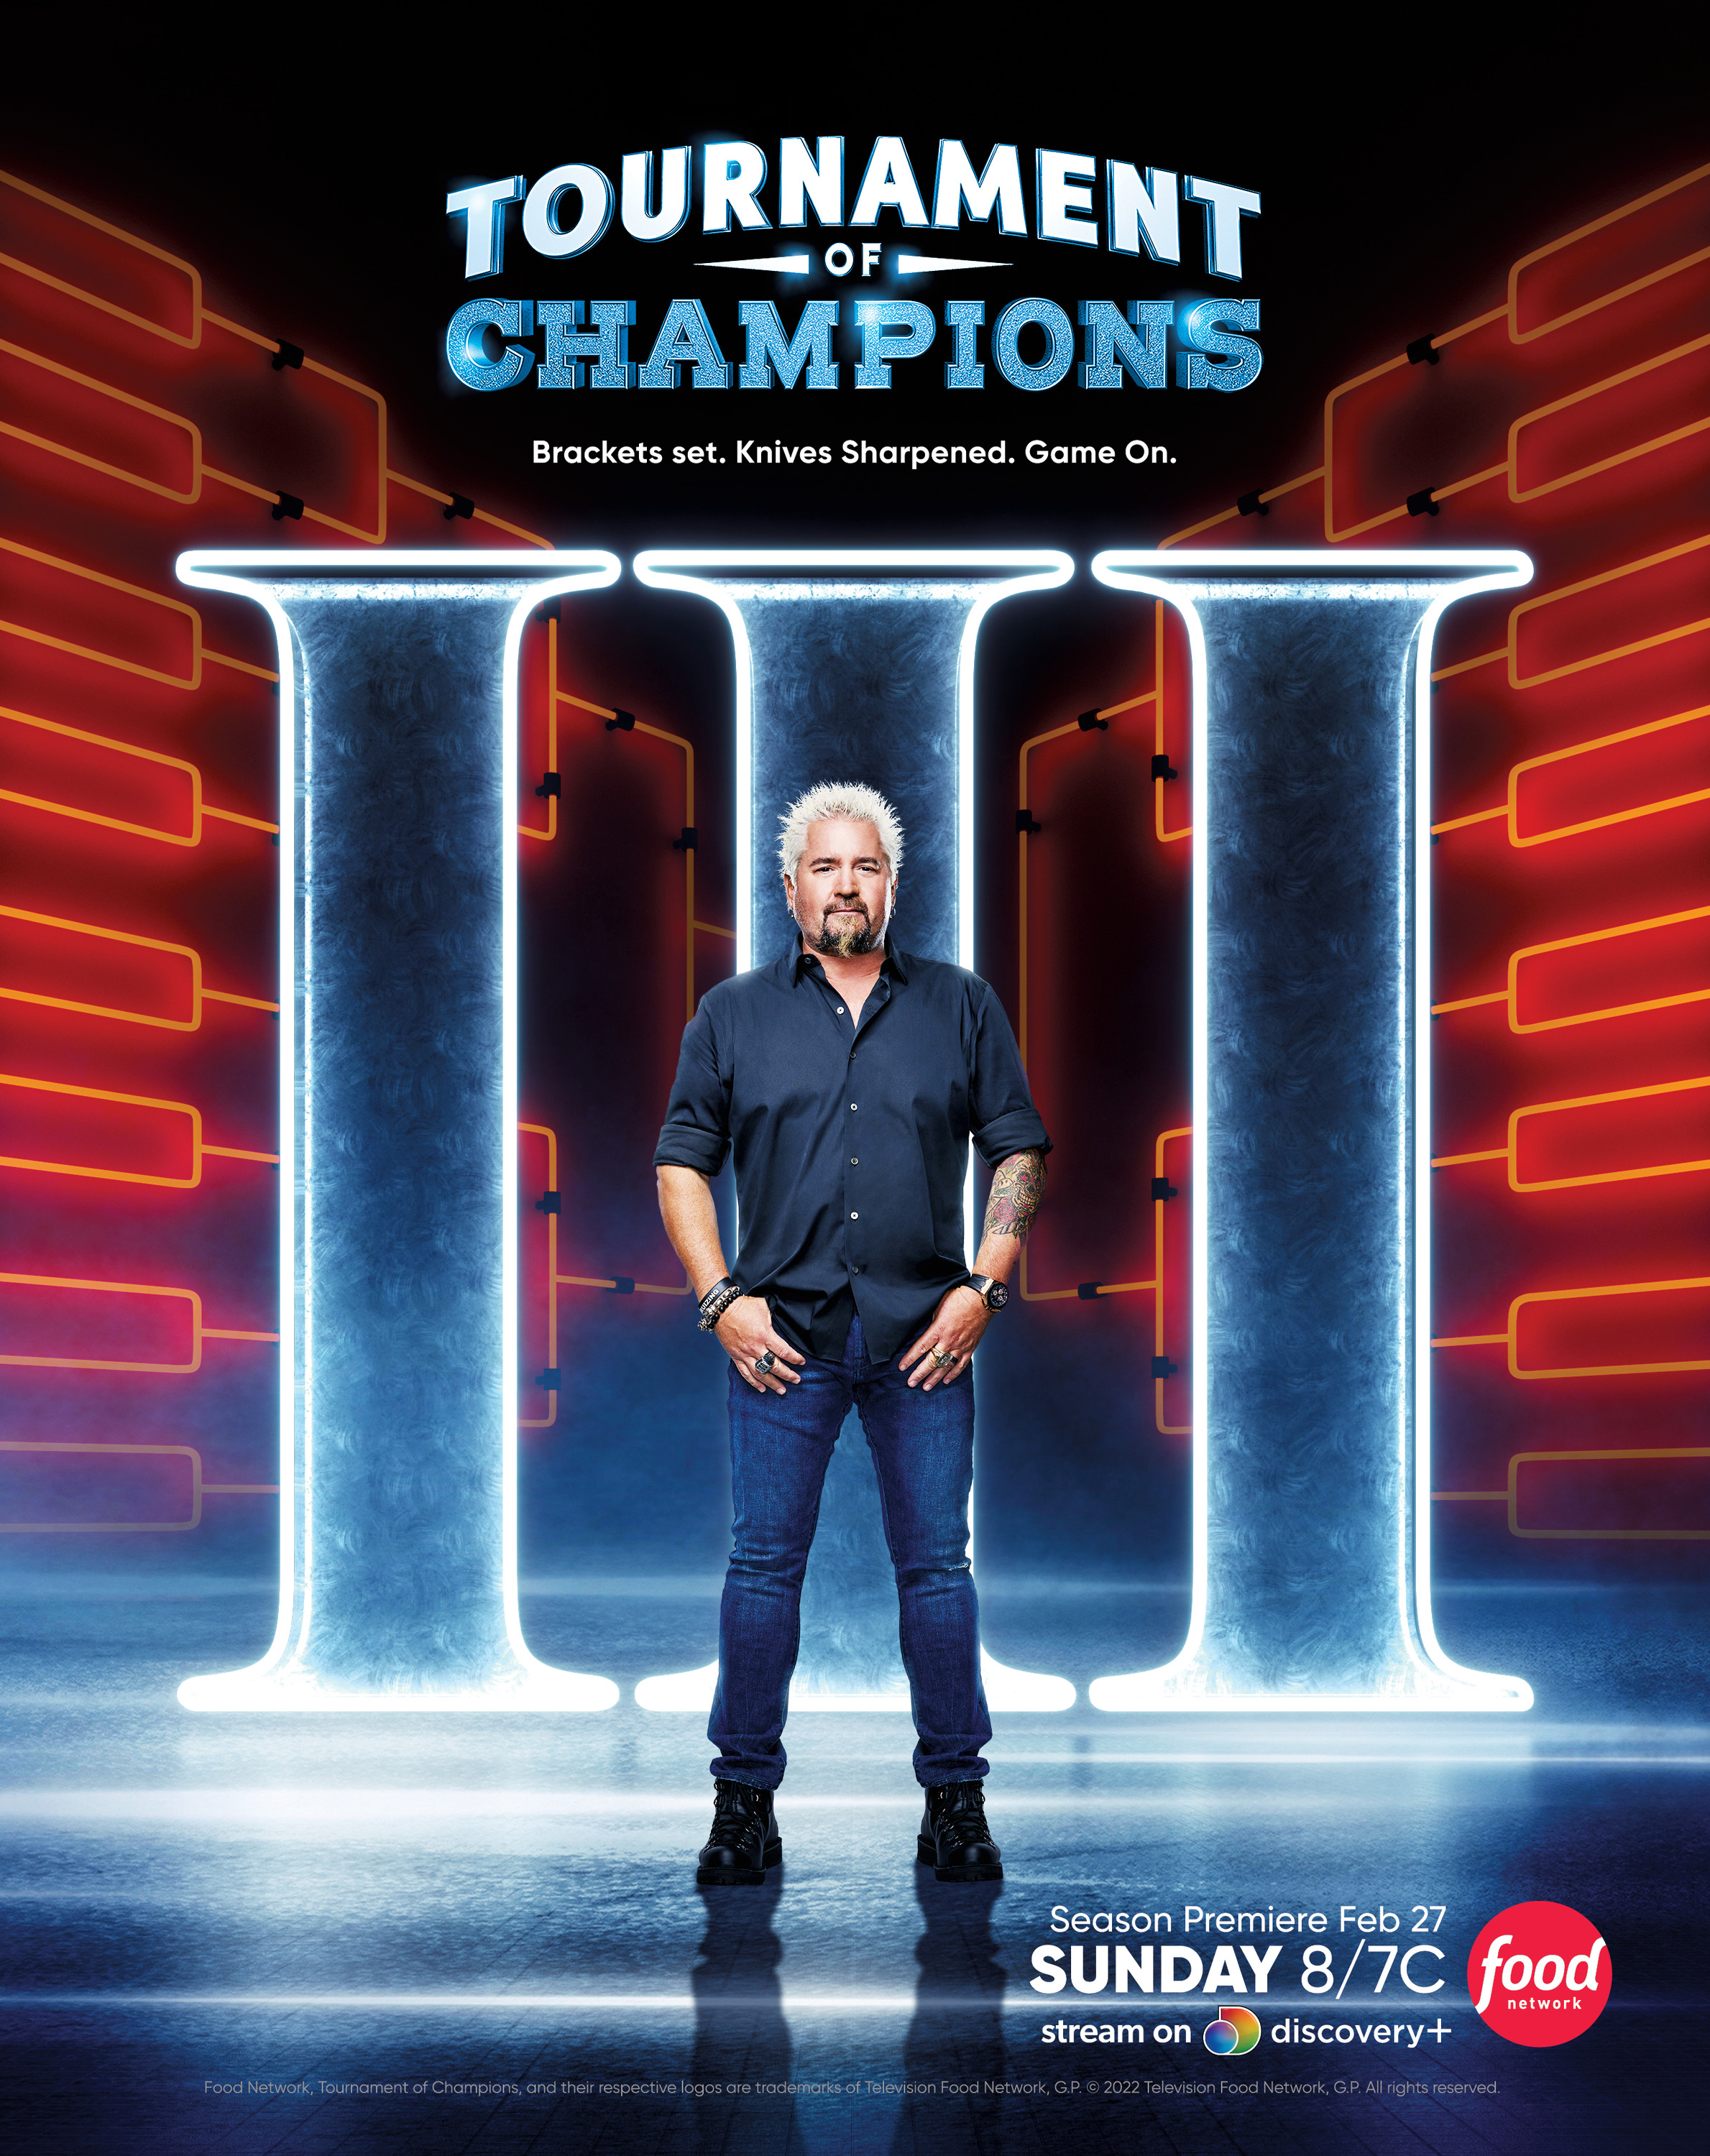 Mega Sized TV Poster Image for Tournament of Champions 